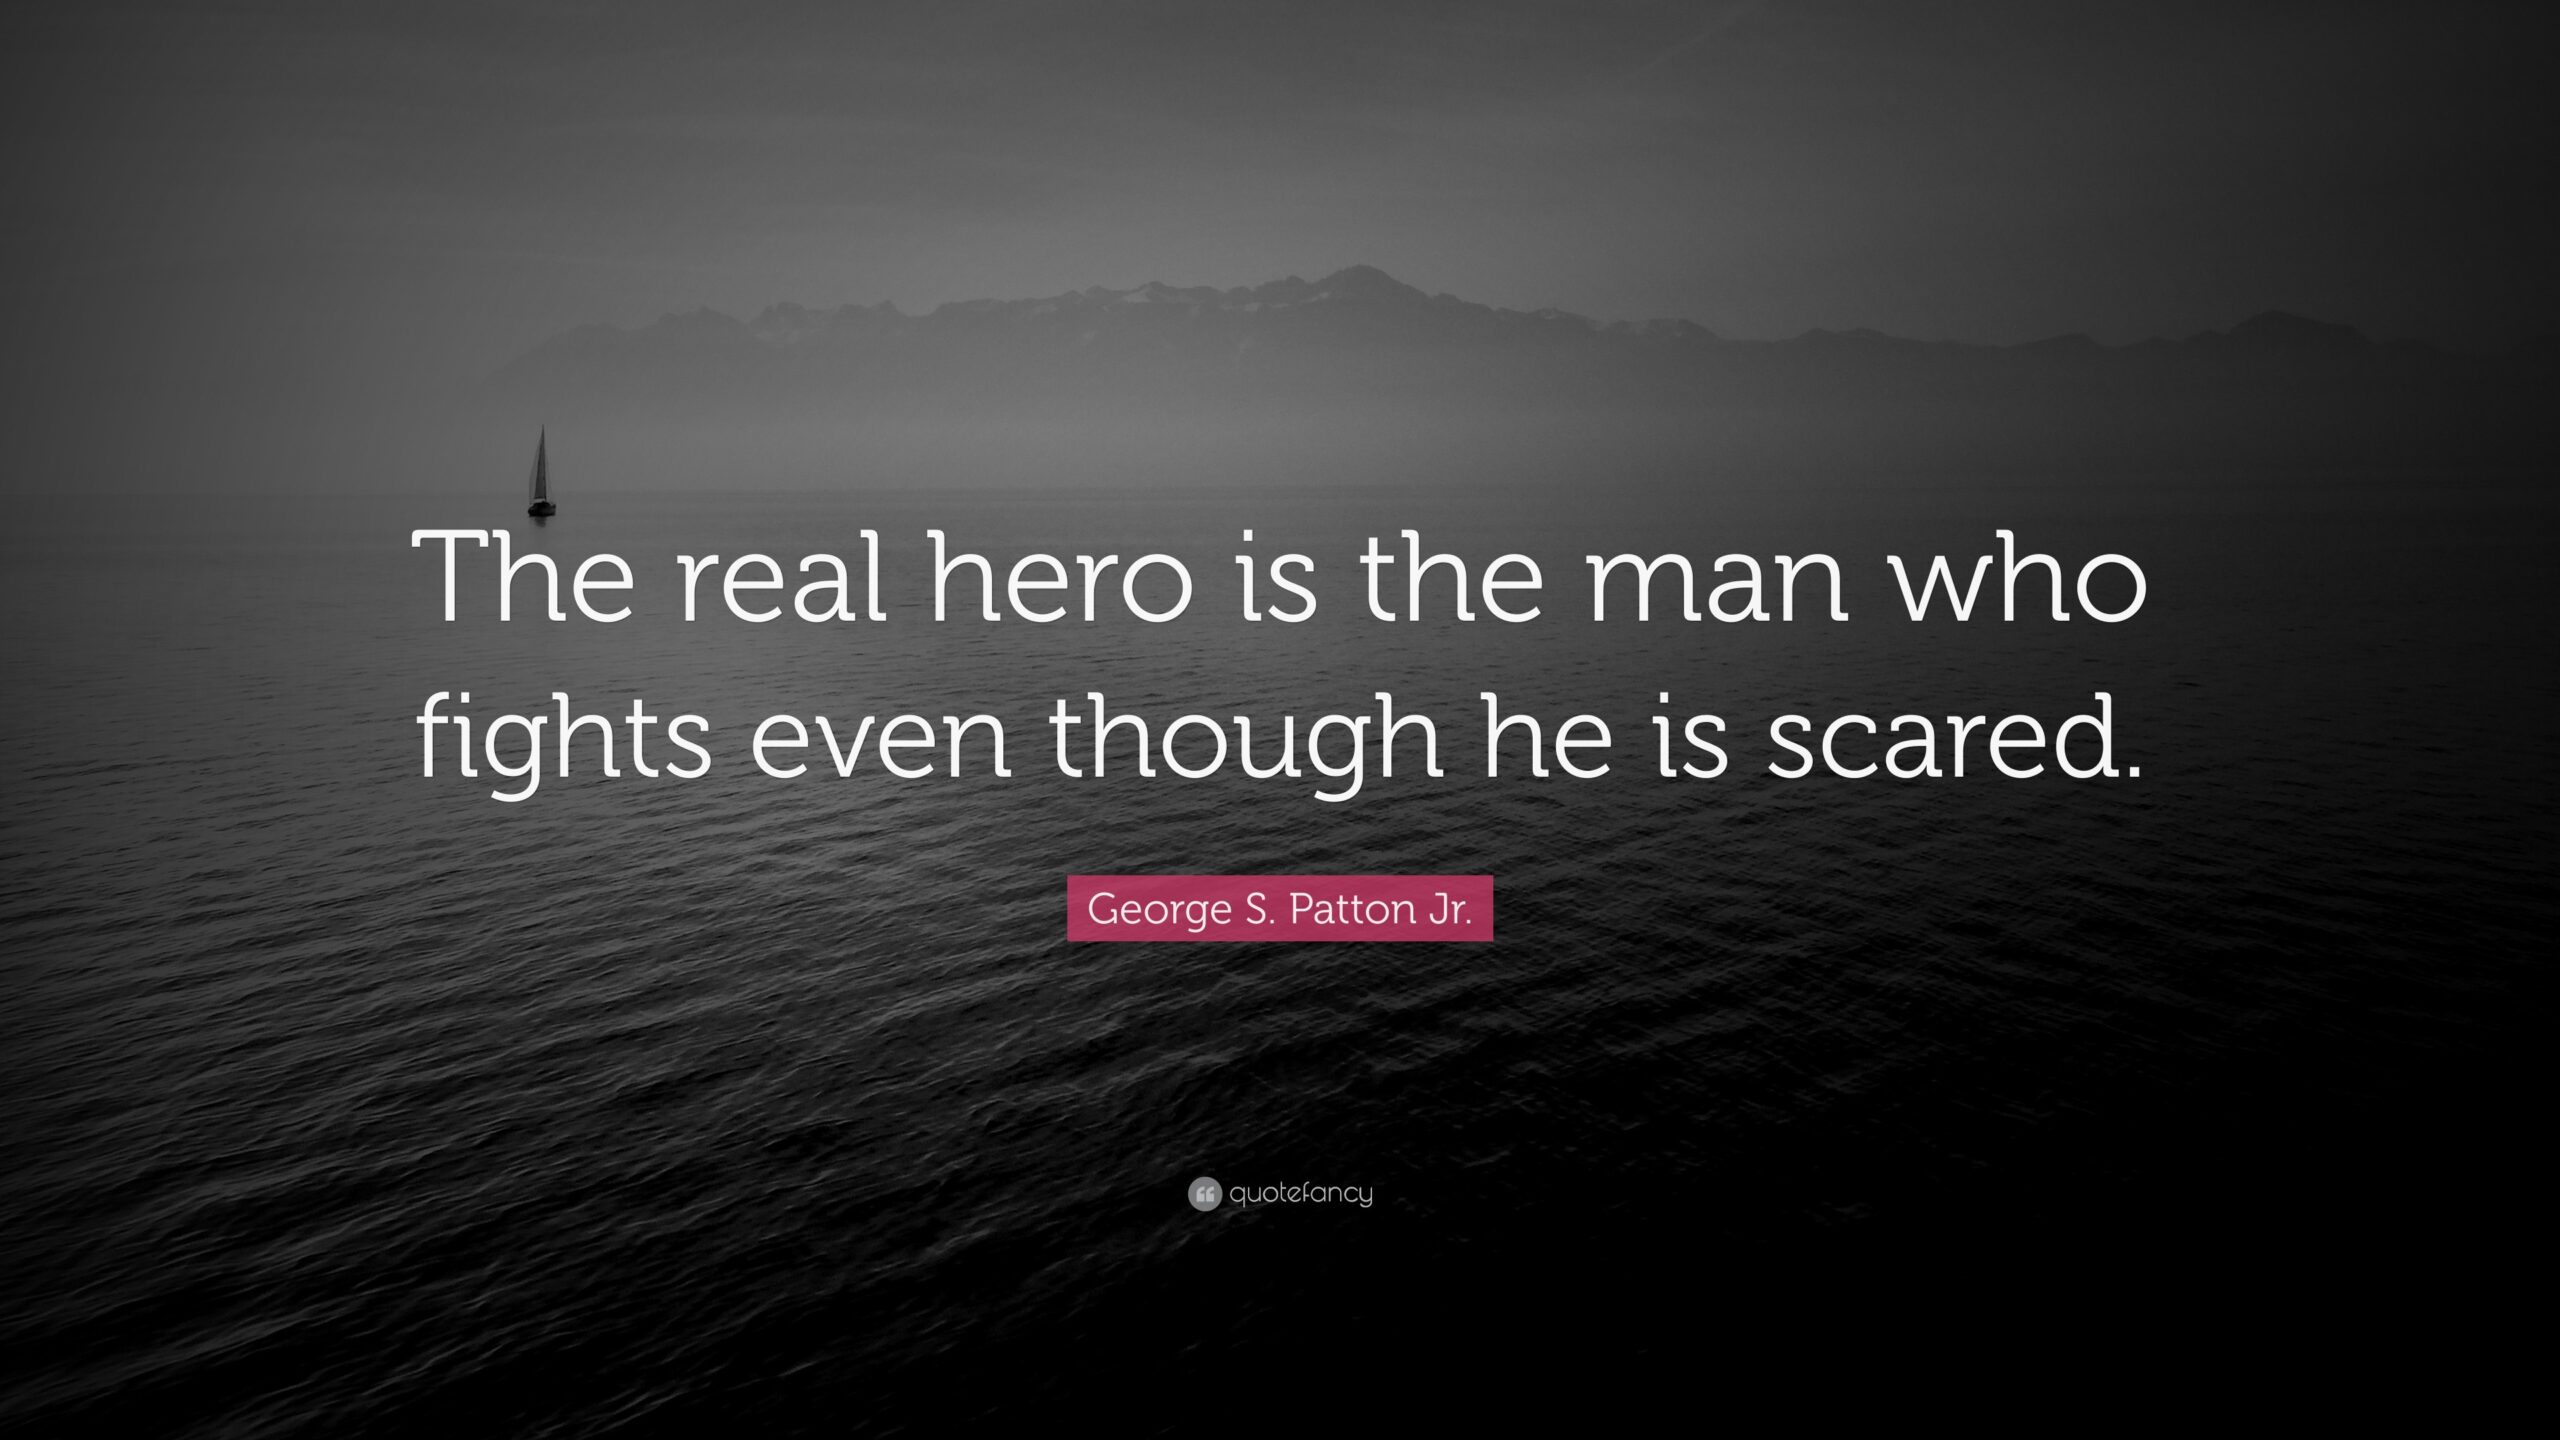 Short Quotes About Being Real The Real Hero Is The Man Who Fights Even Though